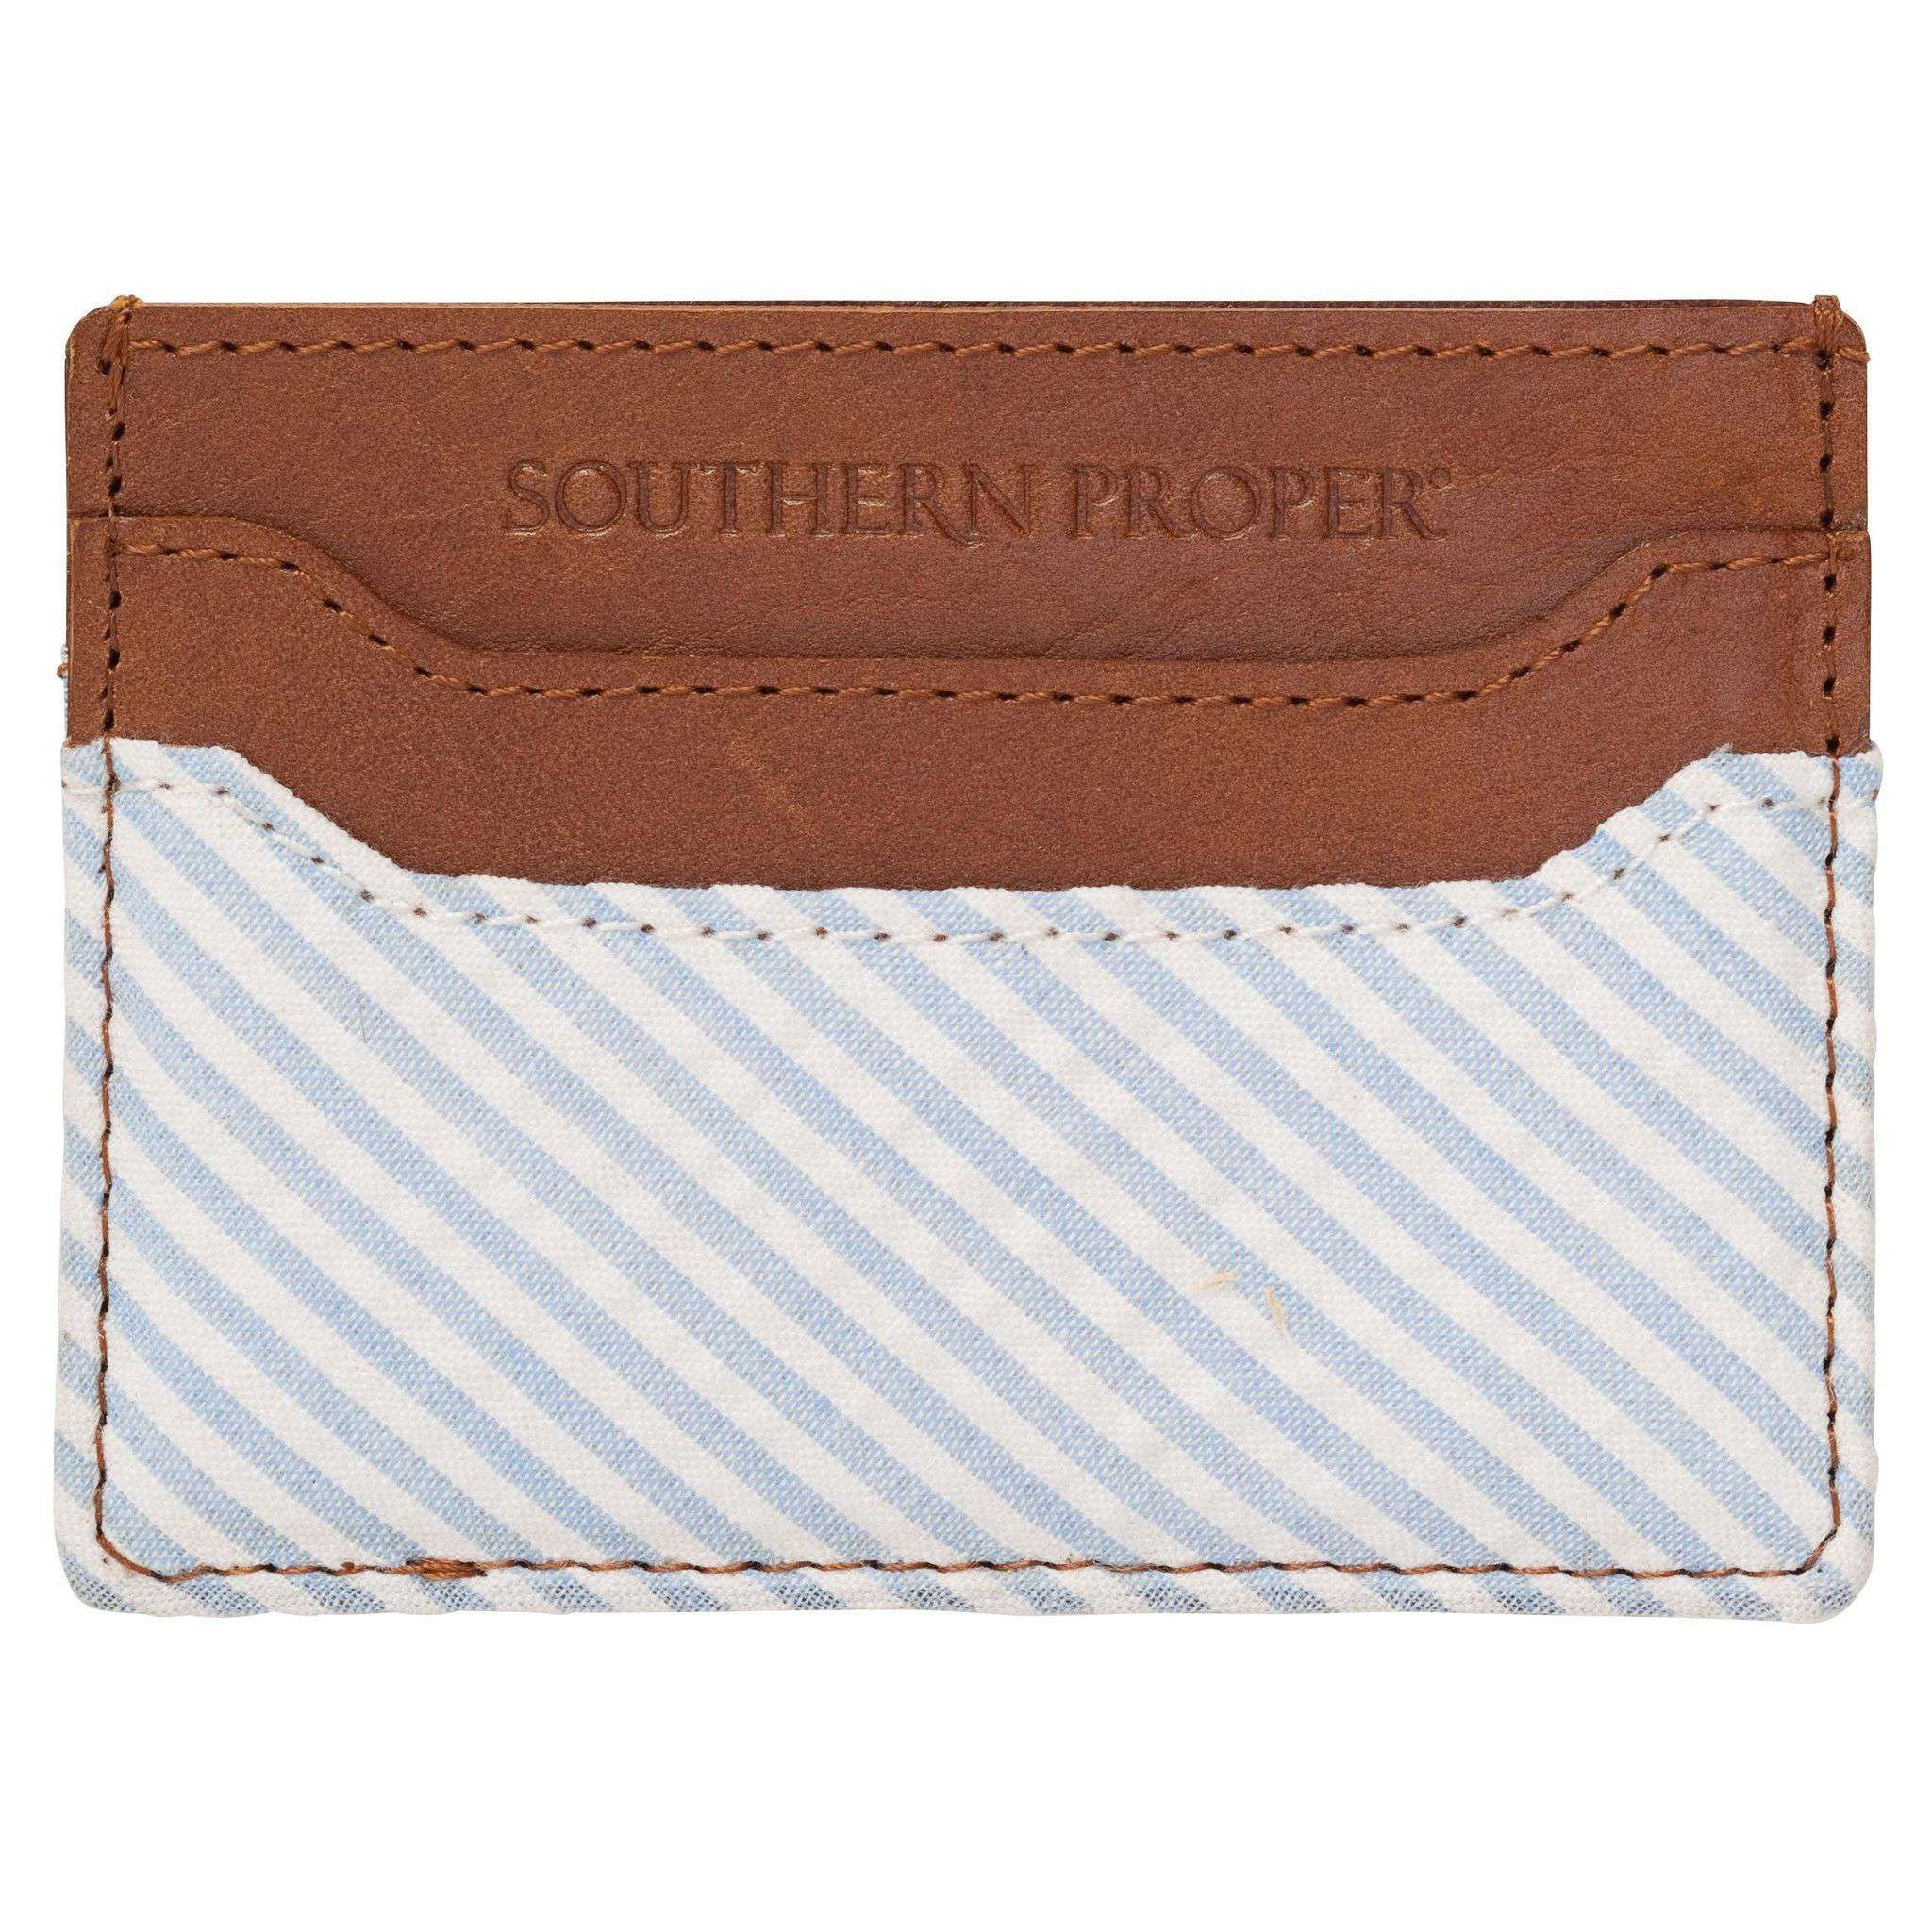 Proper Card Case in Blue/White Seersucker by Southern Proper - Country Club Prep